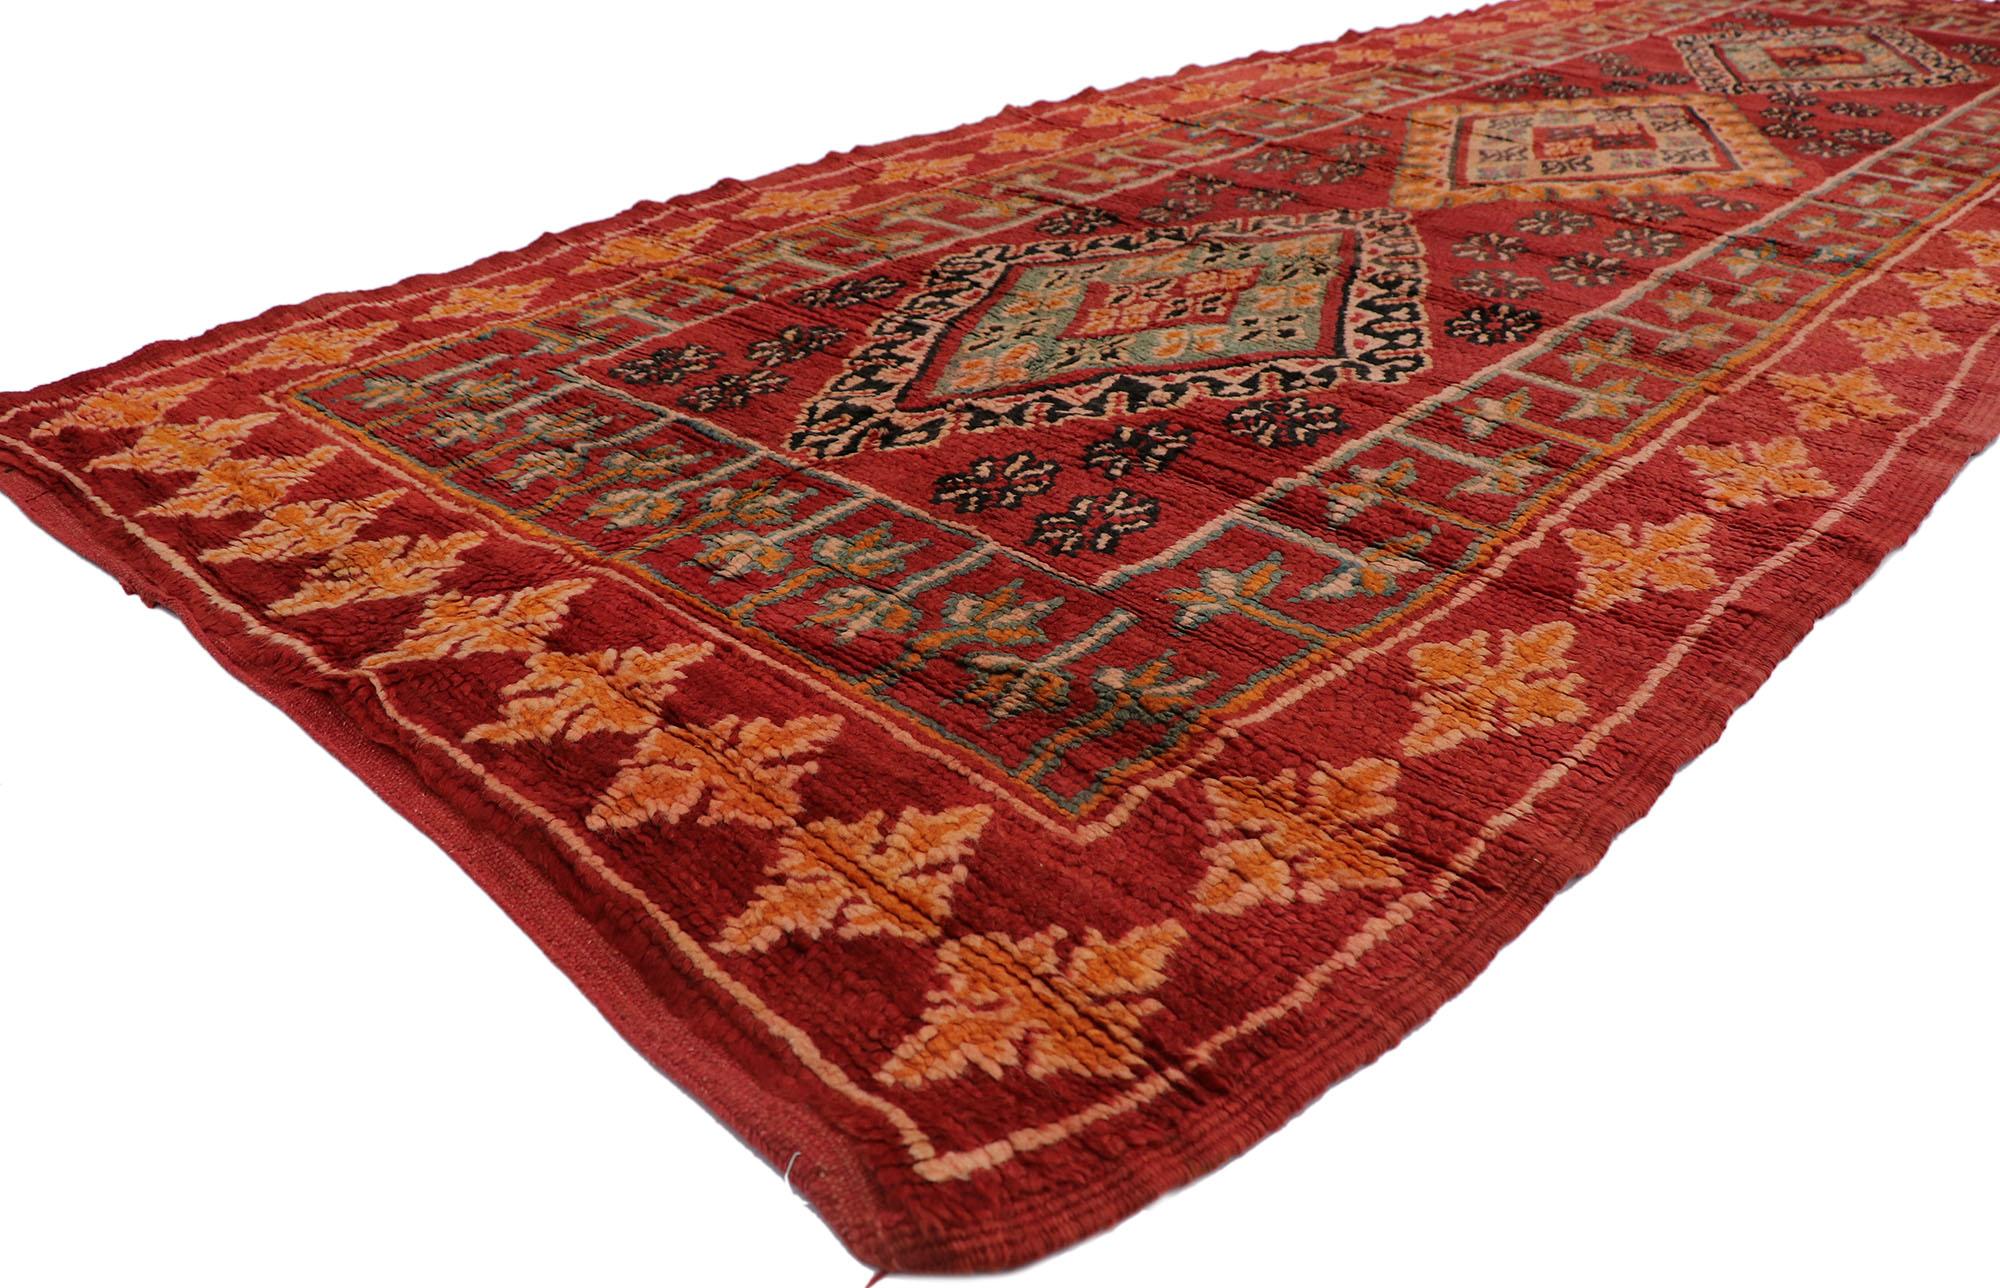 21486 Vintage Berber Red Boujad Moroccan Rug with Tribal Style 04'09 x 13'02. Showcasing a bold expressive design, incredible detail and texture, this hand knotted wool vintage Berber Boujad Moroccan rug is a captivating vision of woven beauty. The